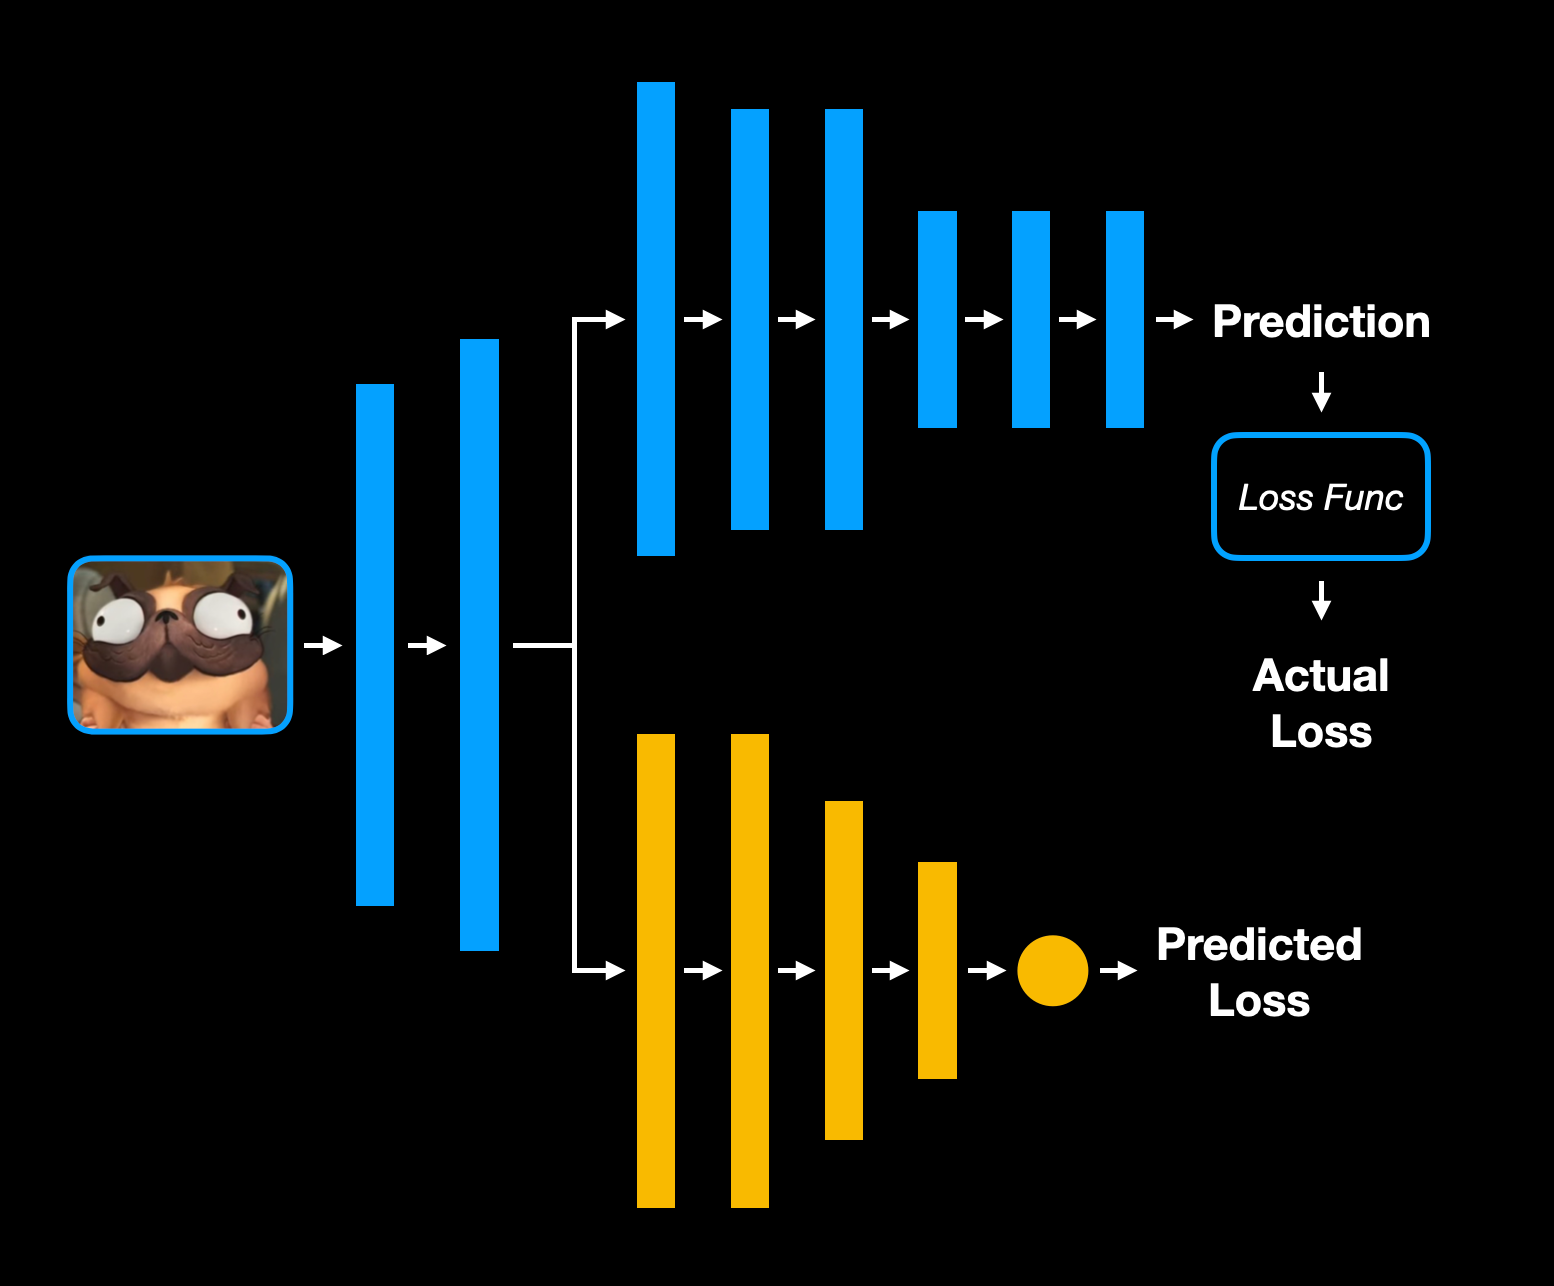 A diagram showing an image of a pug being fed into a double branch network. The main branch, in blue, shows the classification path for the input and feeds into the loss function to get the actual loss for the input. The second branch, in yellow, is a loss prediction branch that attempts to guess what the loss will be for the input.